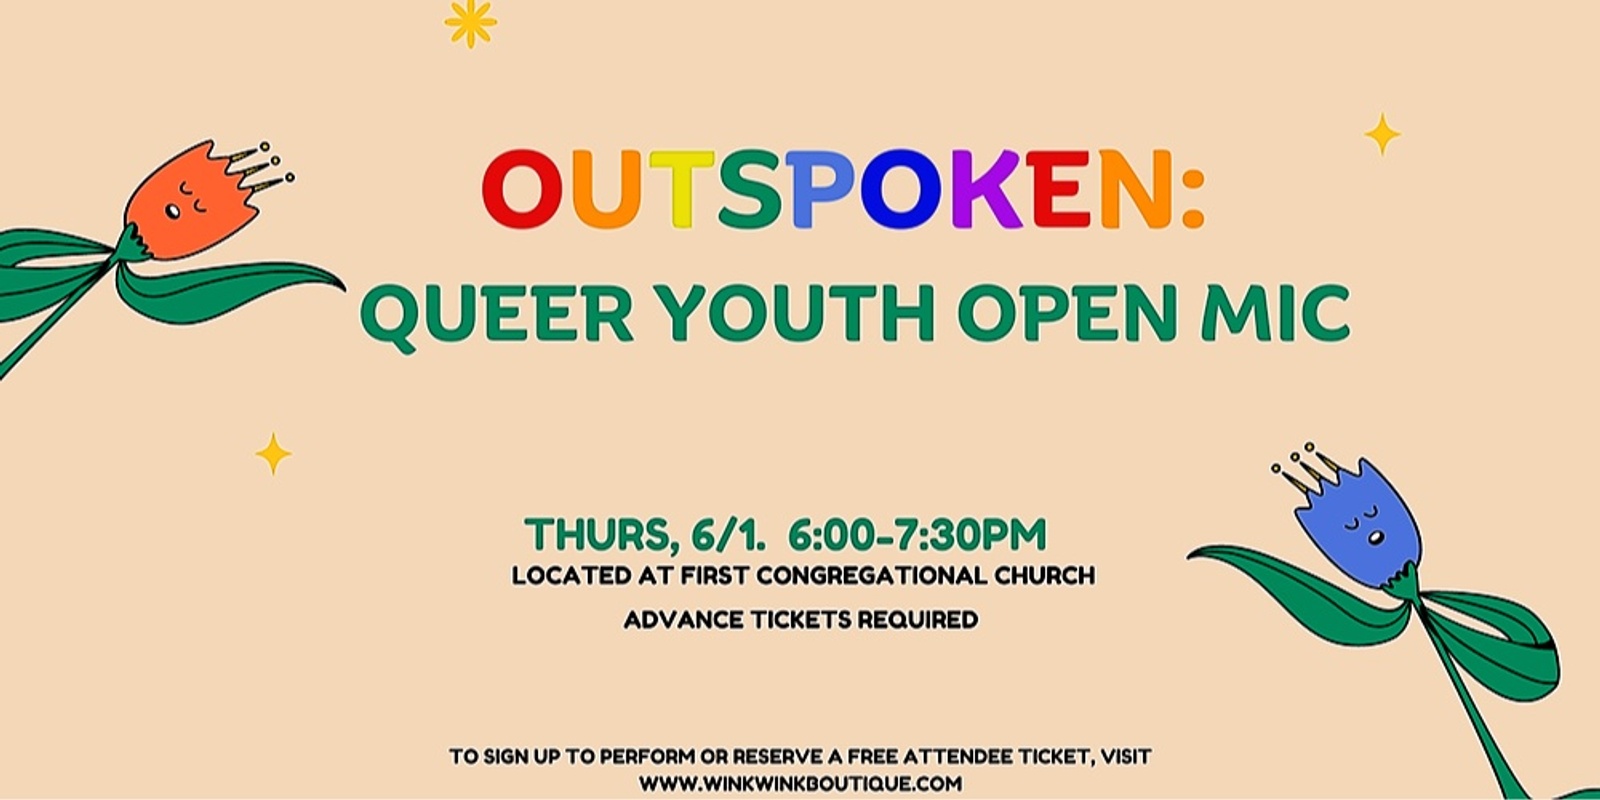 Outspoken: Queer Youth Open Mic